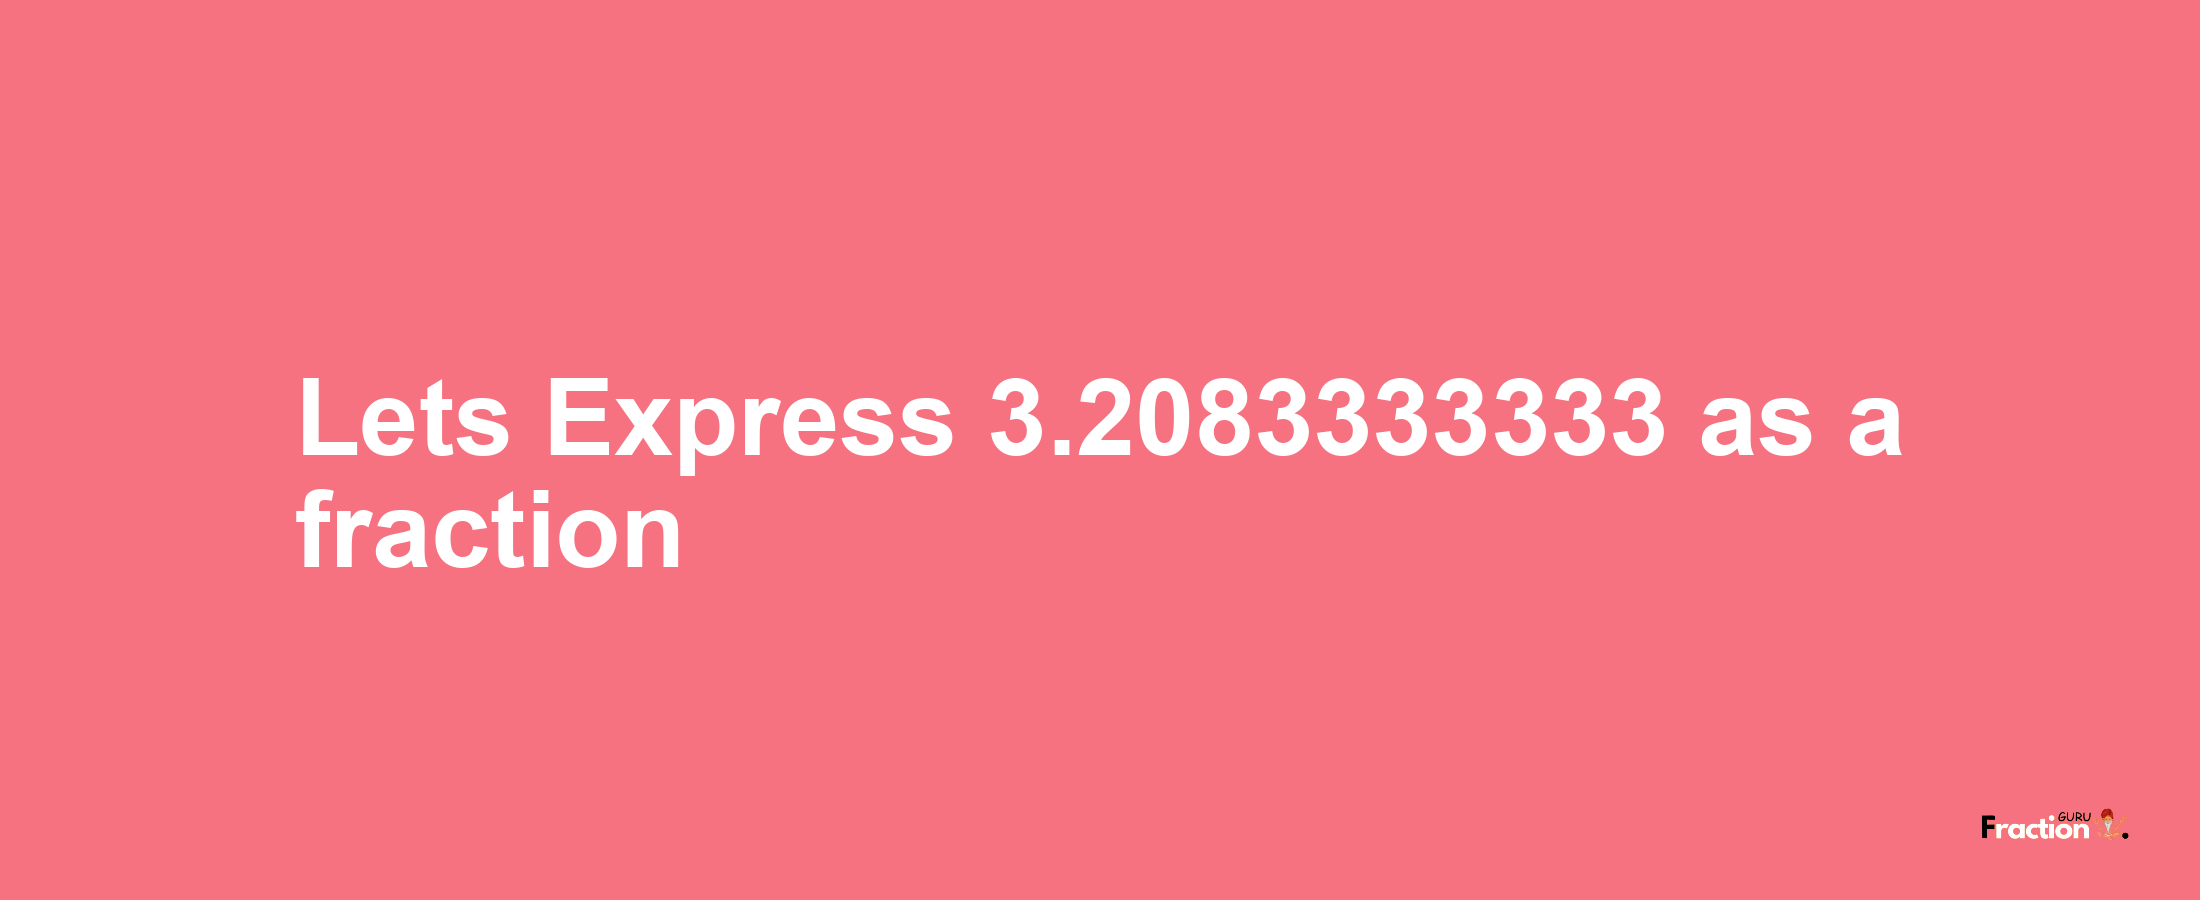 Lets Express 3.2083333333 as afraction